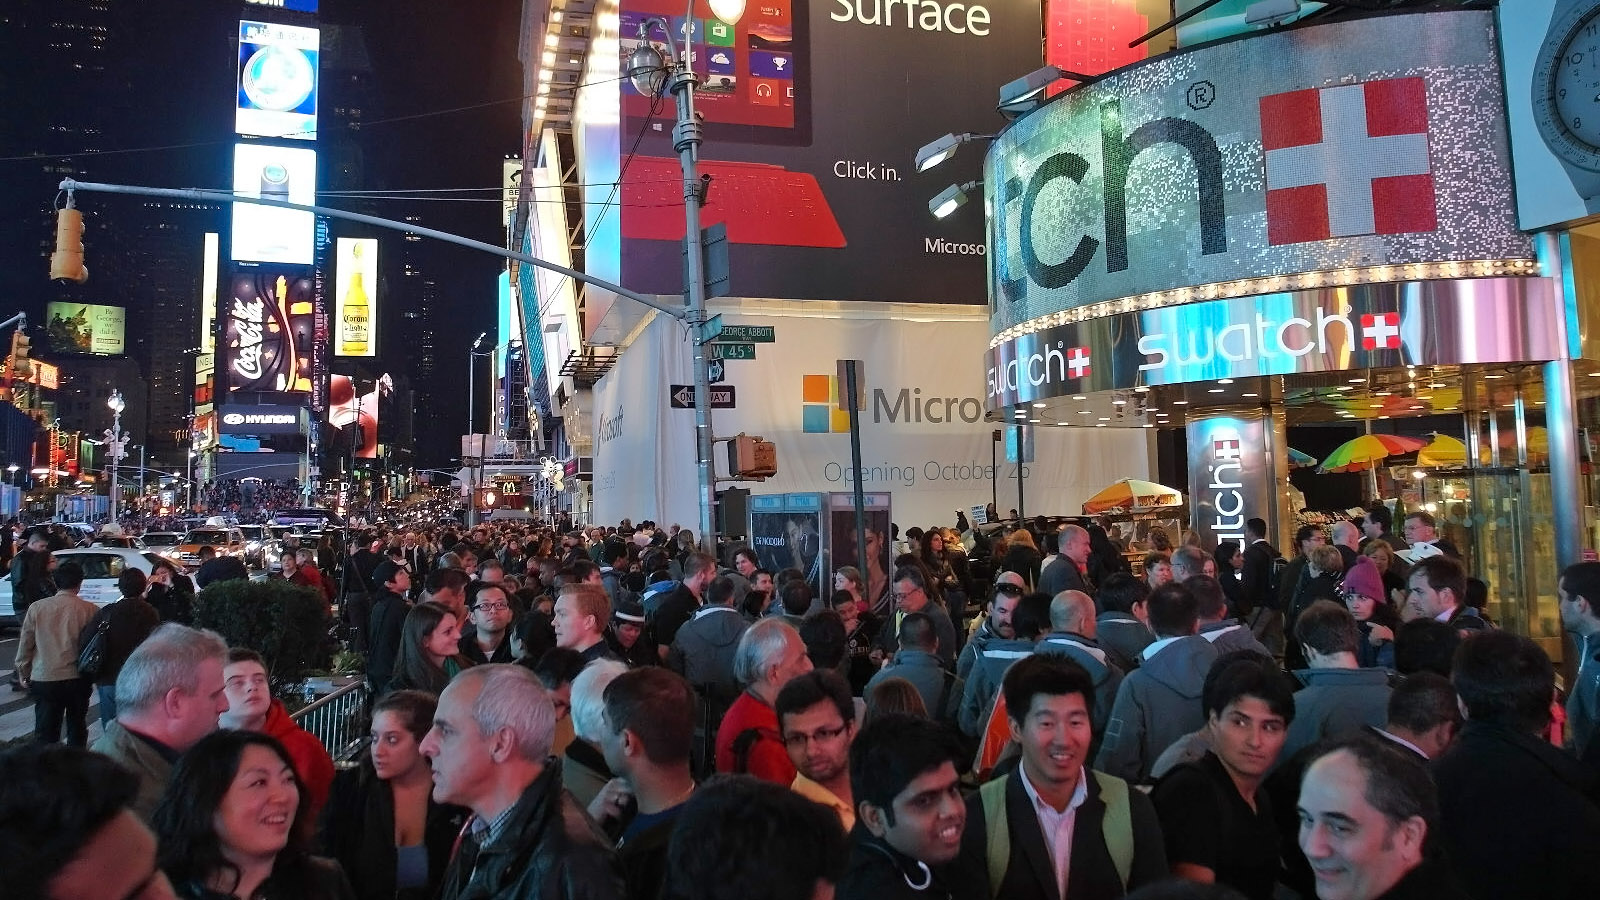 The NYC launch of Microsoft Surface and Windows 8